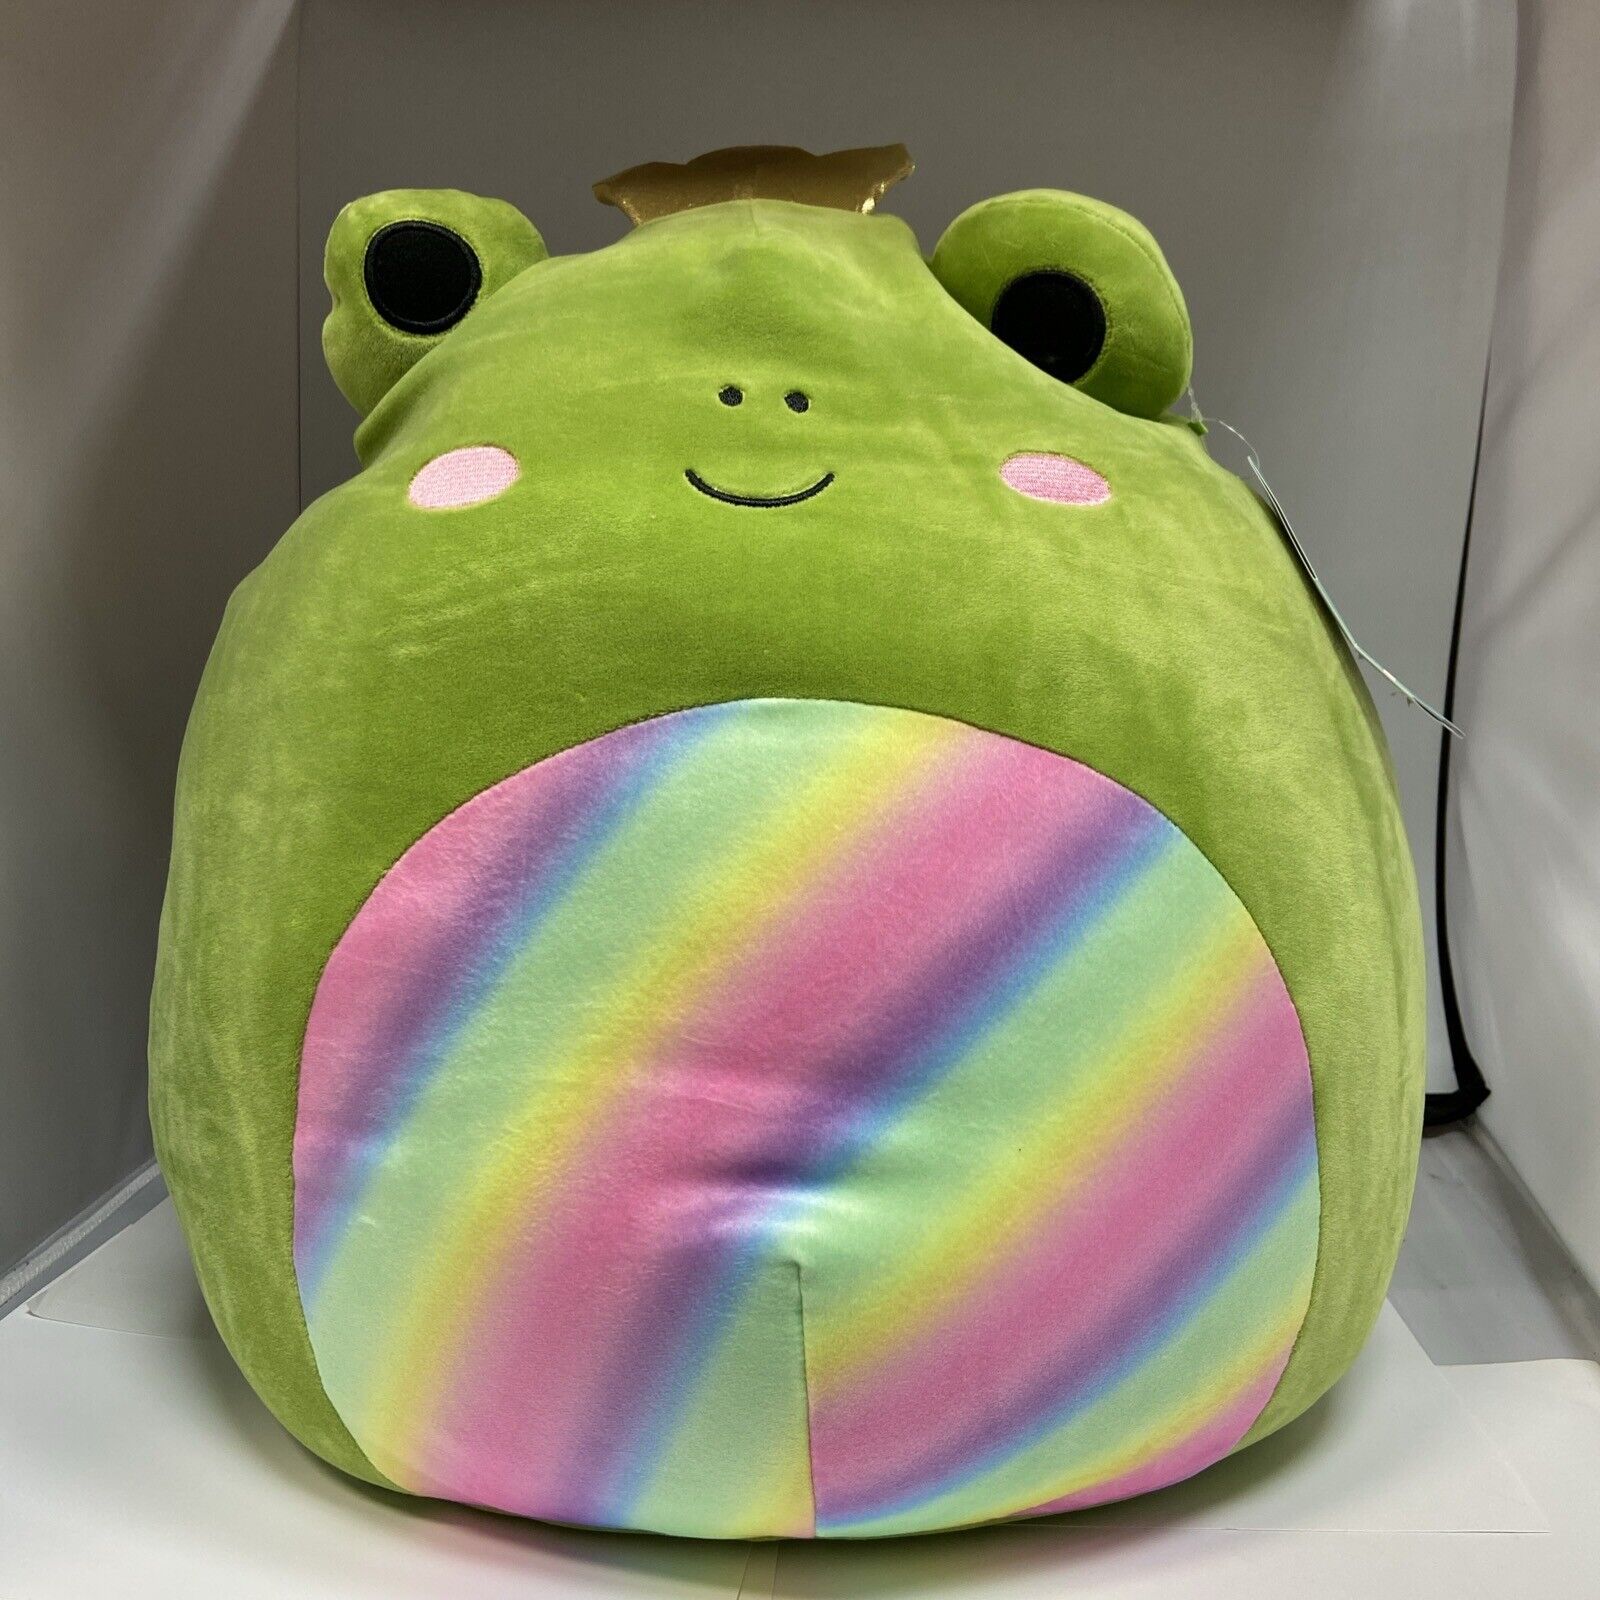 Kellytoy Squishmallow Jumbo 16” New Doxl The Frog Green Crown Prince.